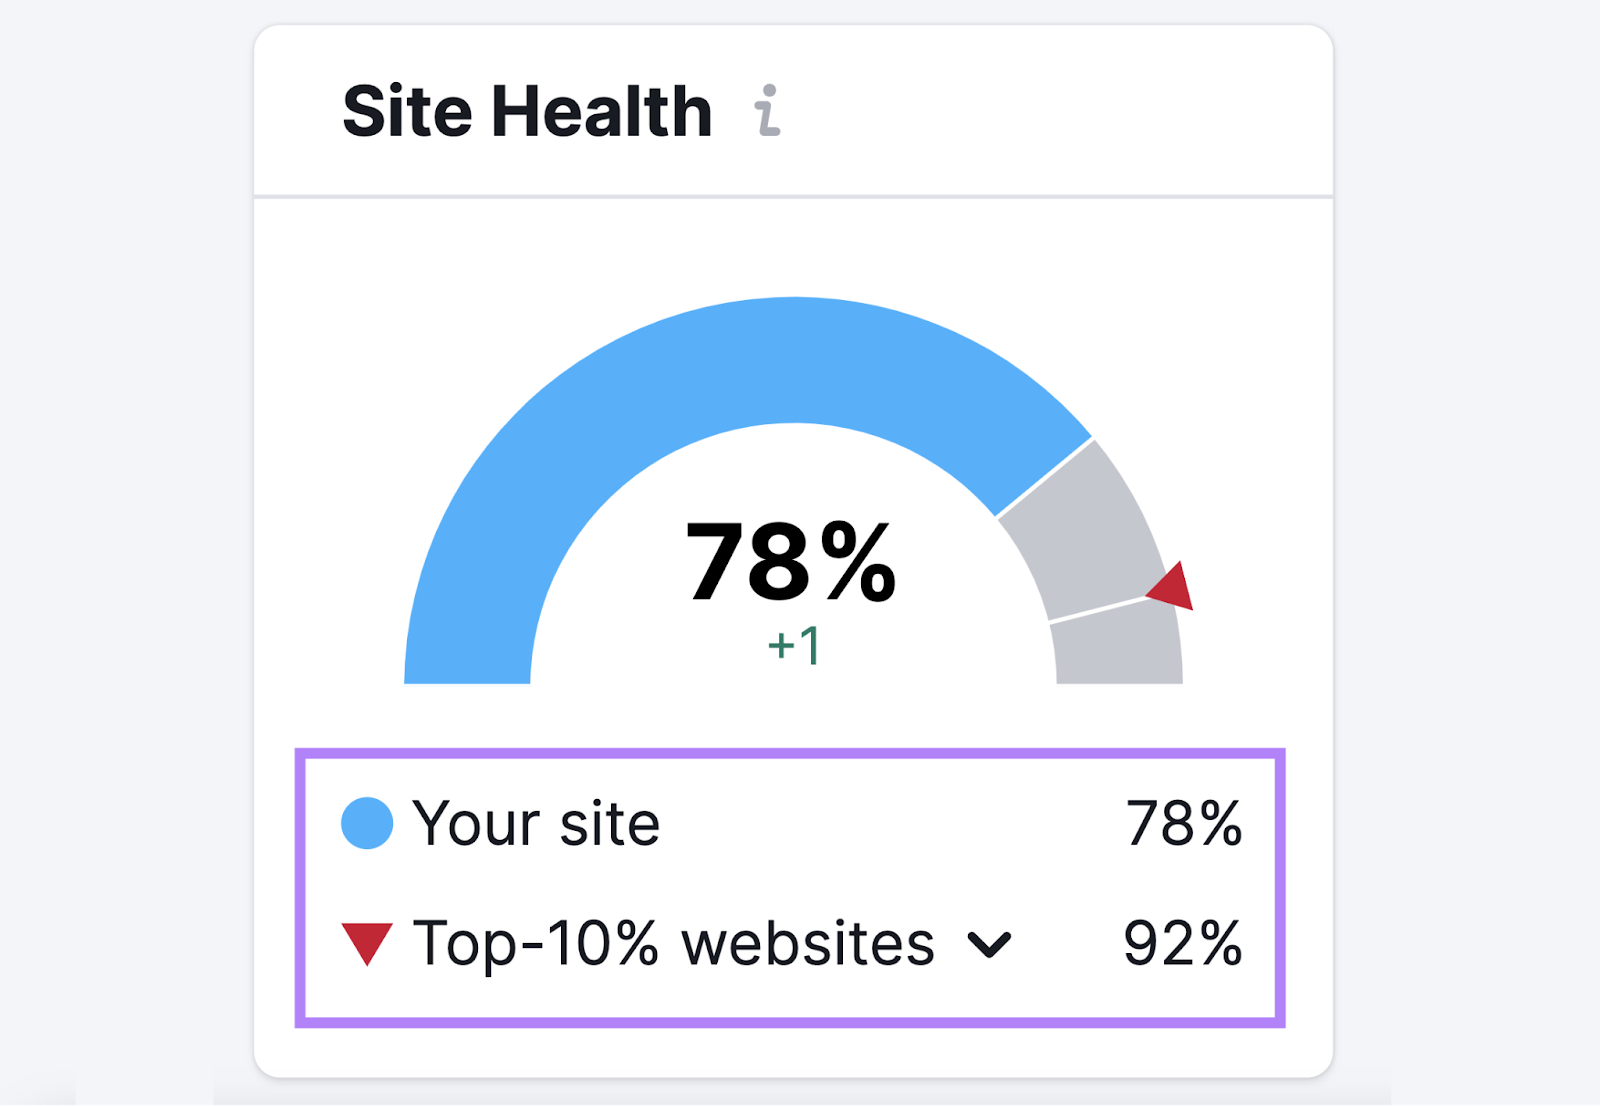 "Site Health" metric showing "78%" for a fixed  domain